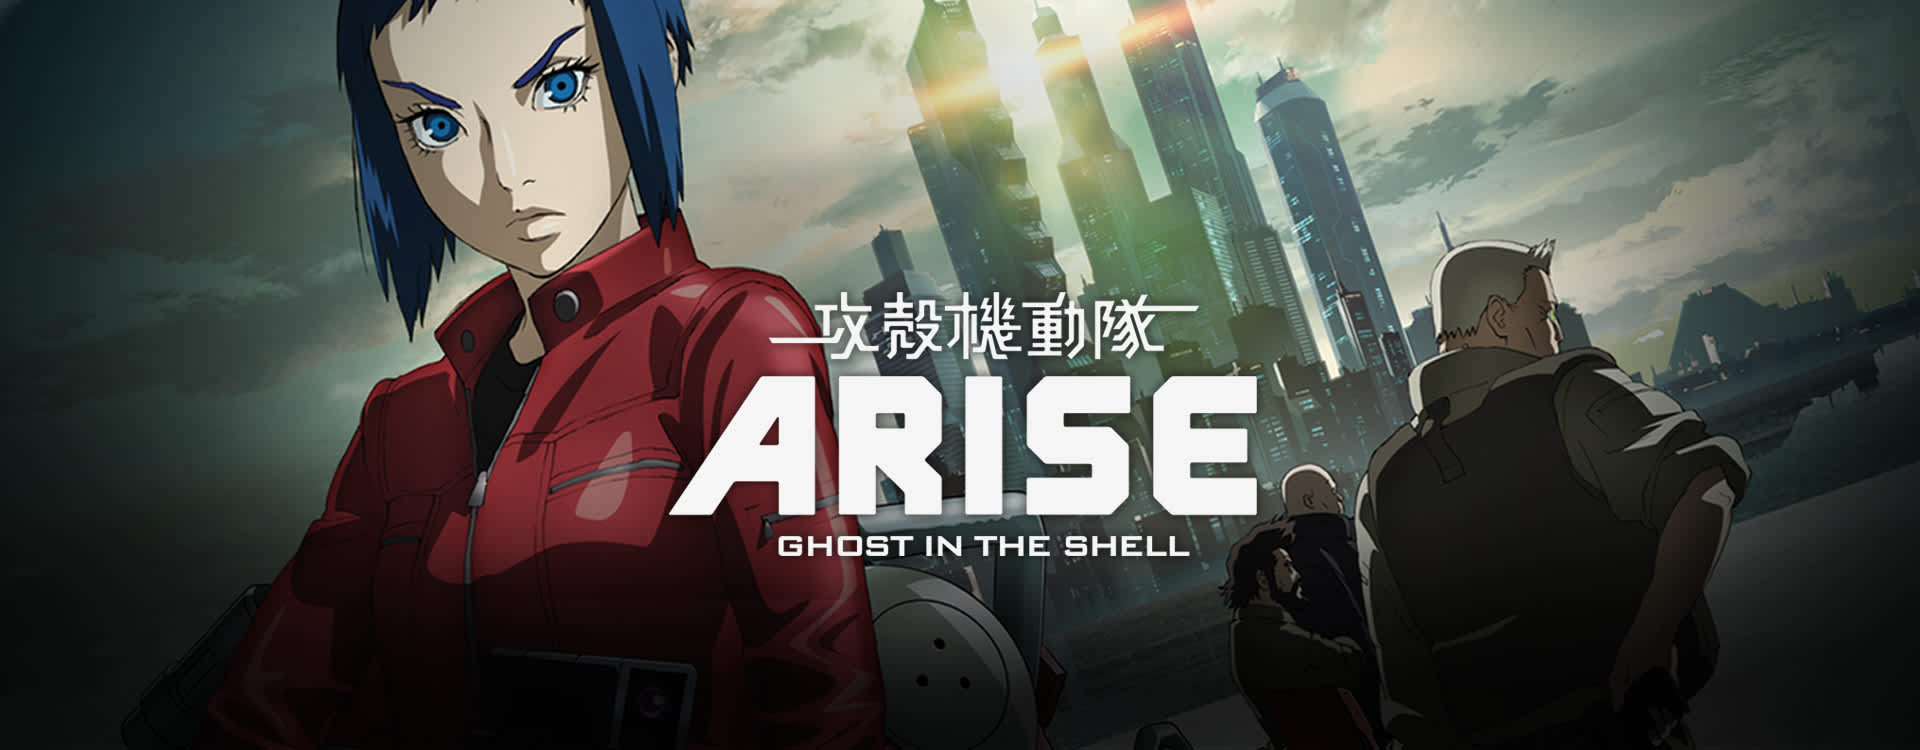 ghost in the shell anime download 1080p